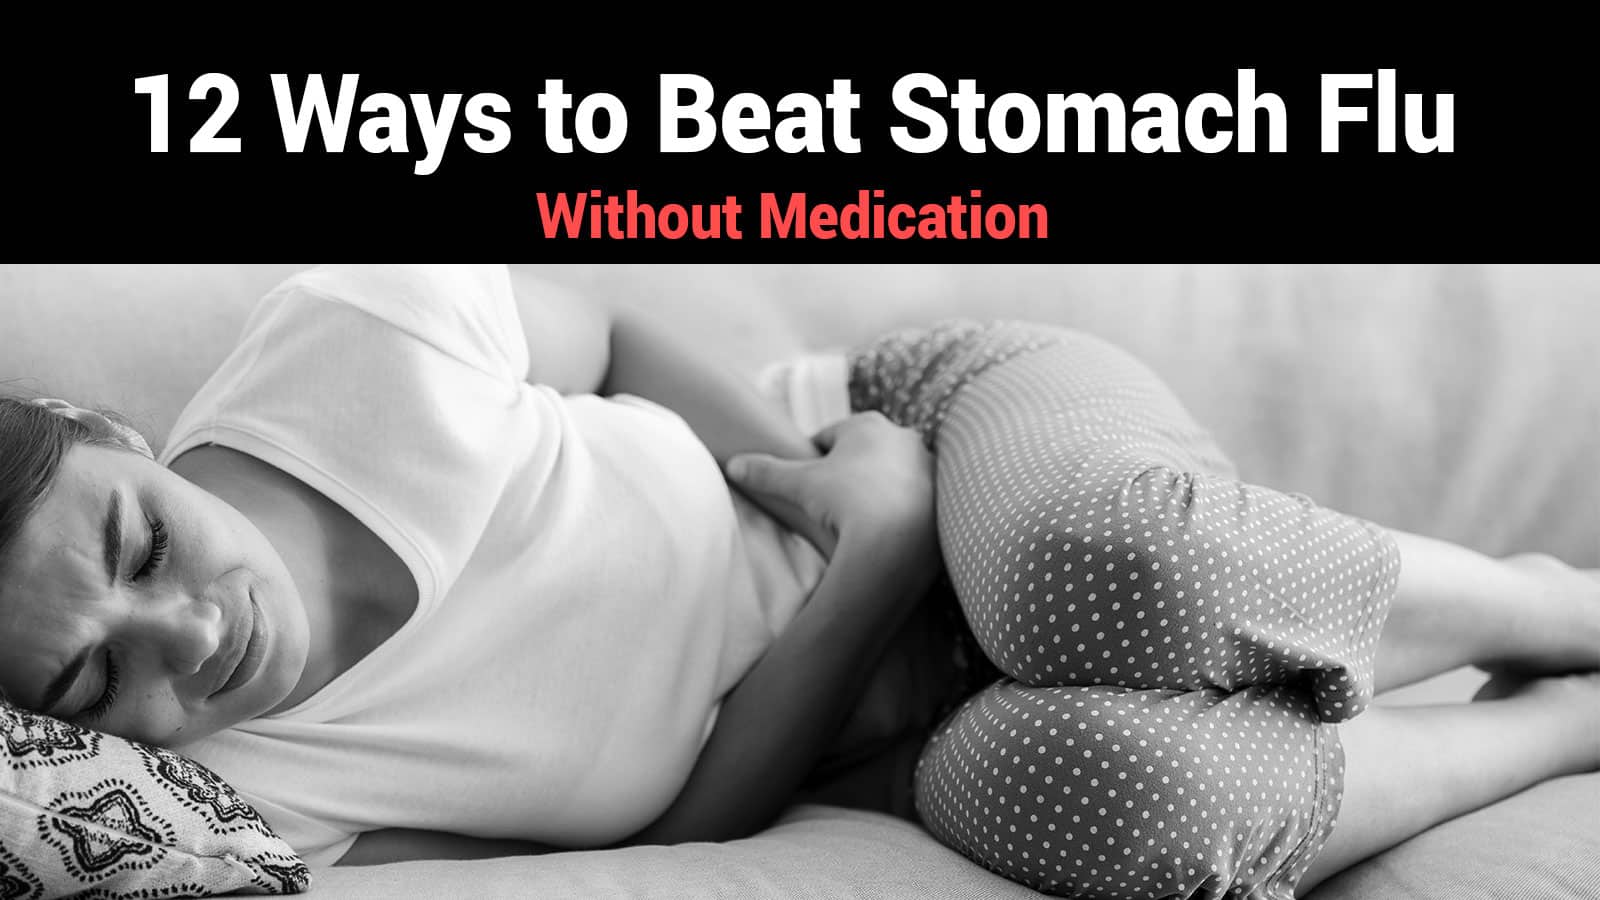 12 Ways to Beat Stomach Flu Without Medication